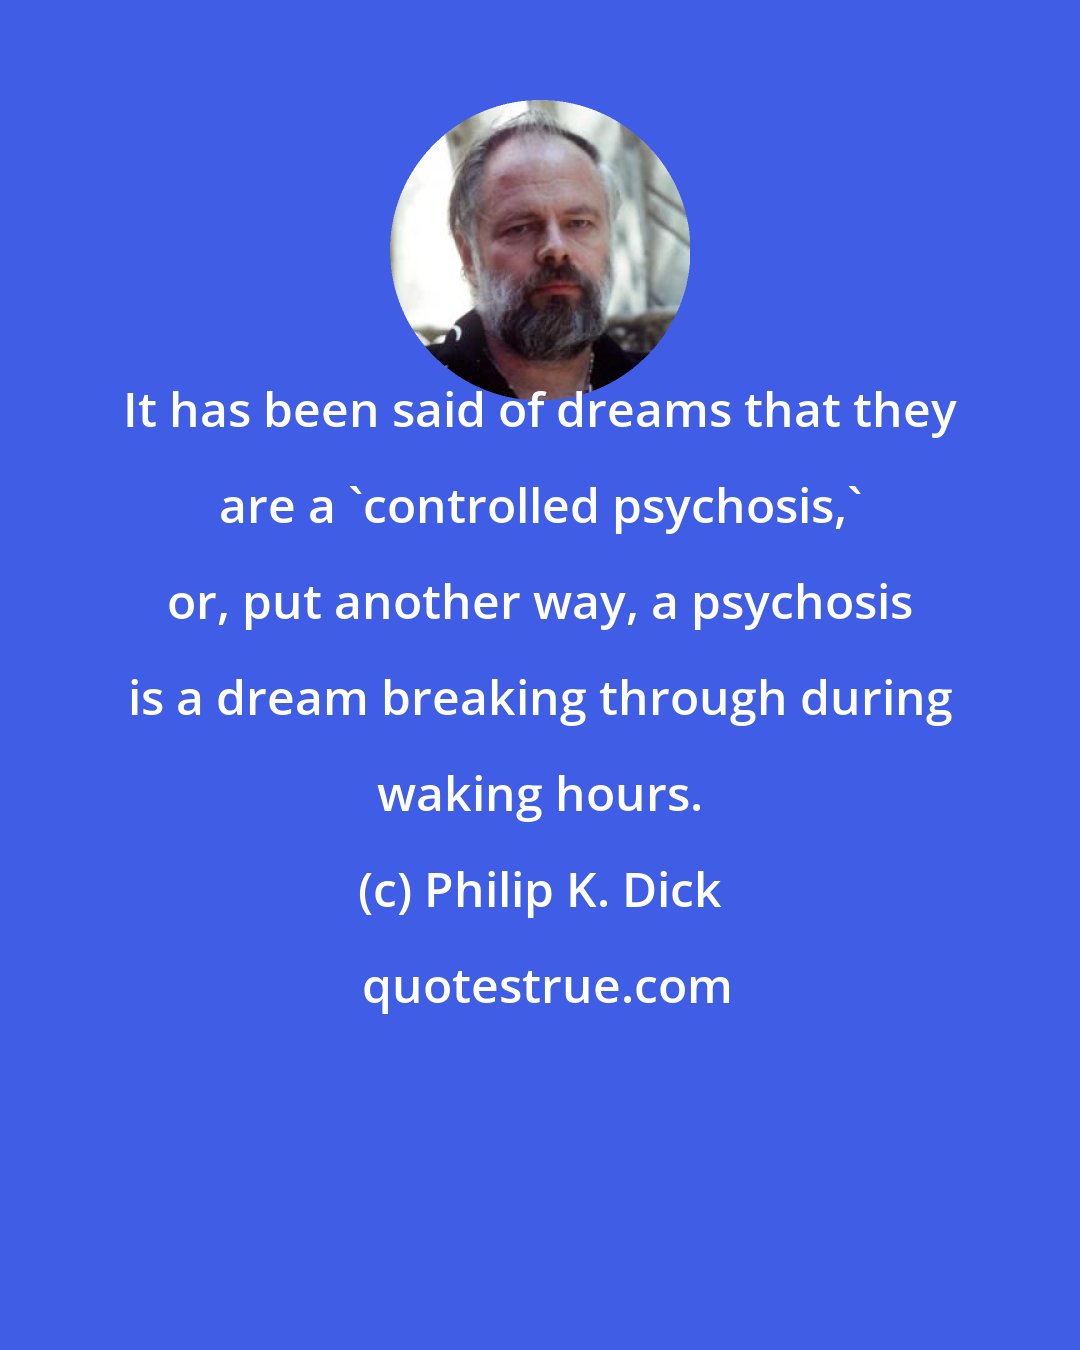 Philip K. Dick: It has been said of dreams that they are a 'controlled psychosis,' or, put another way, a psychosis is a dream breaking through during waking hours.